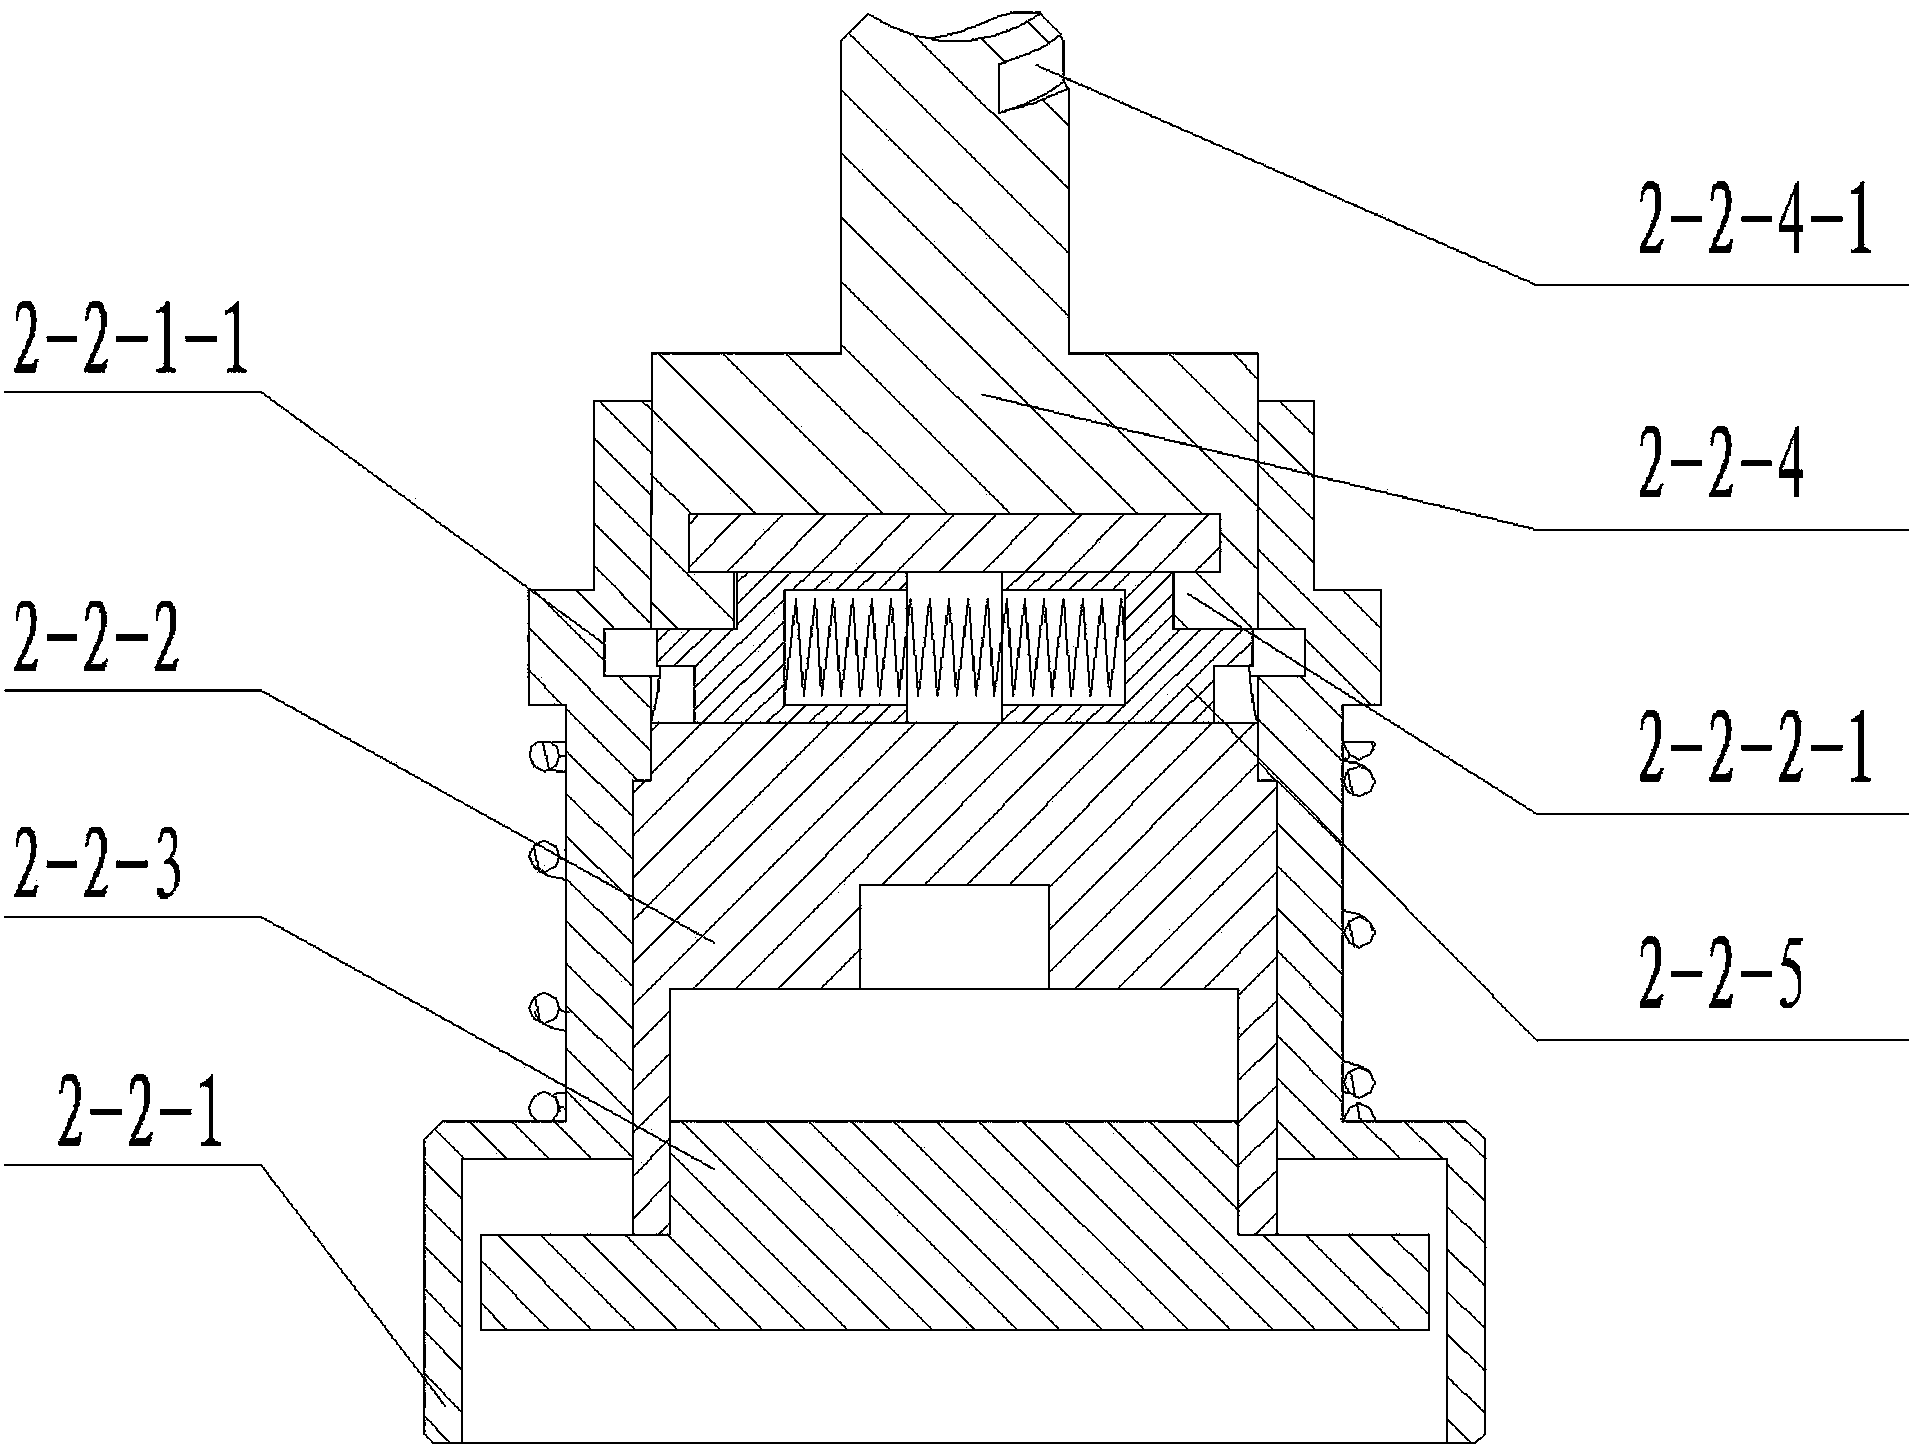 Multi-stamp stamping machine with movement capable of vertically rotating in reciprocating mode to change positions